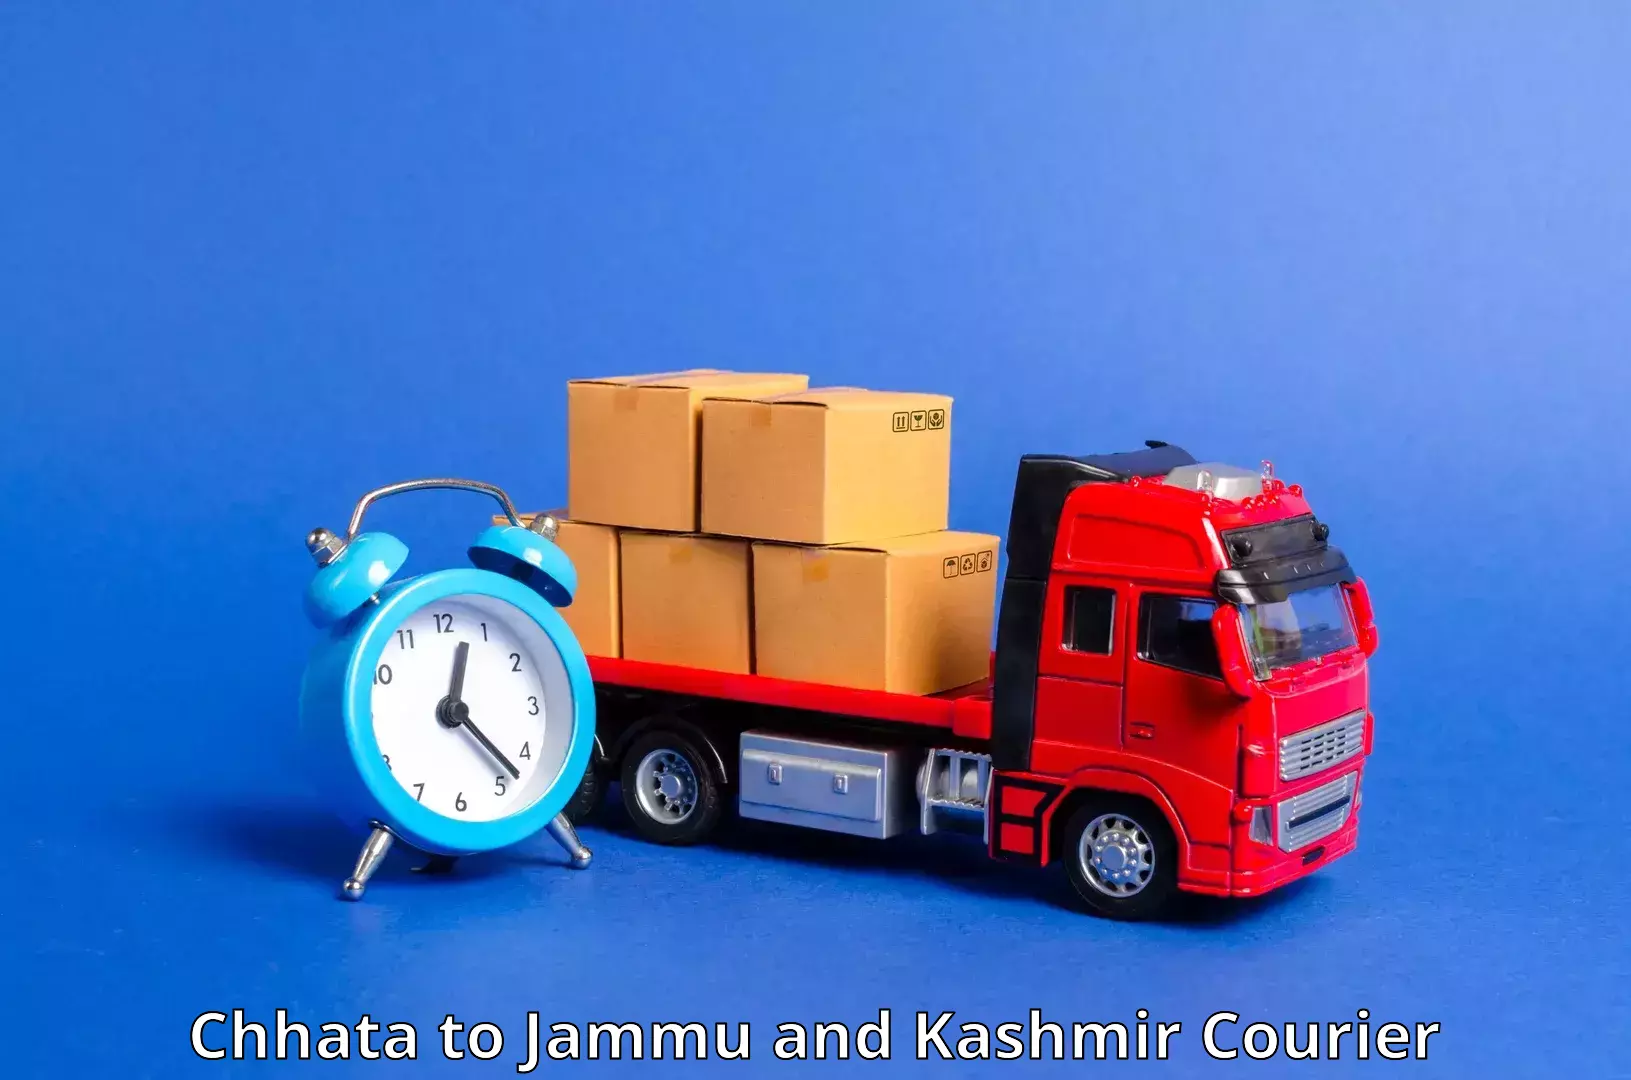 Professional courier handling Chhata to Jammu and Kashmir